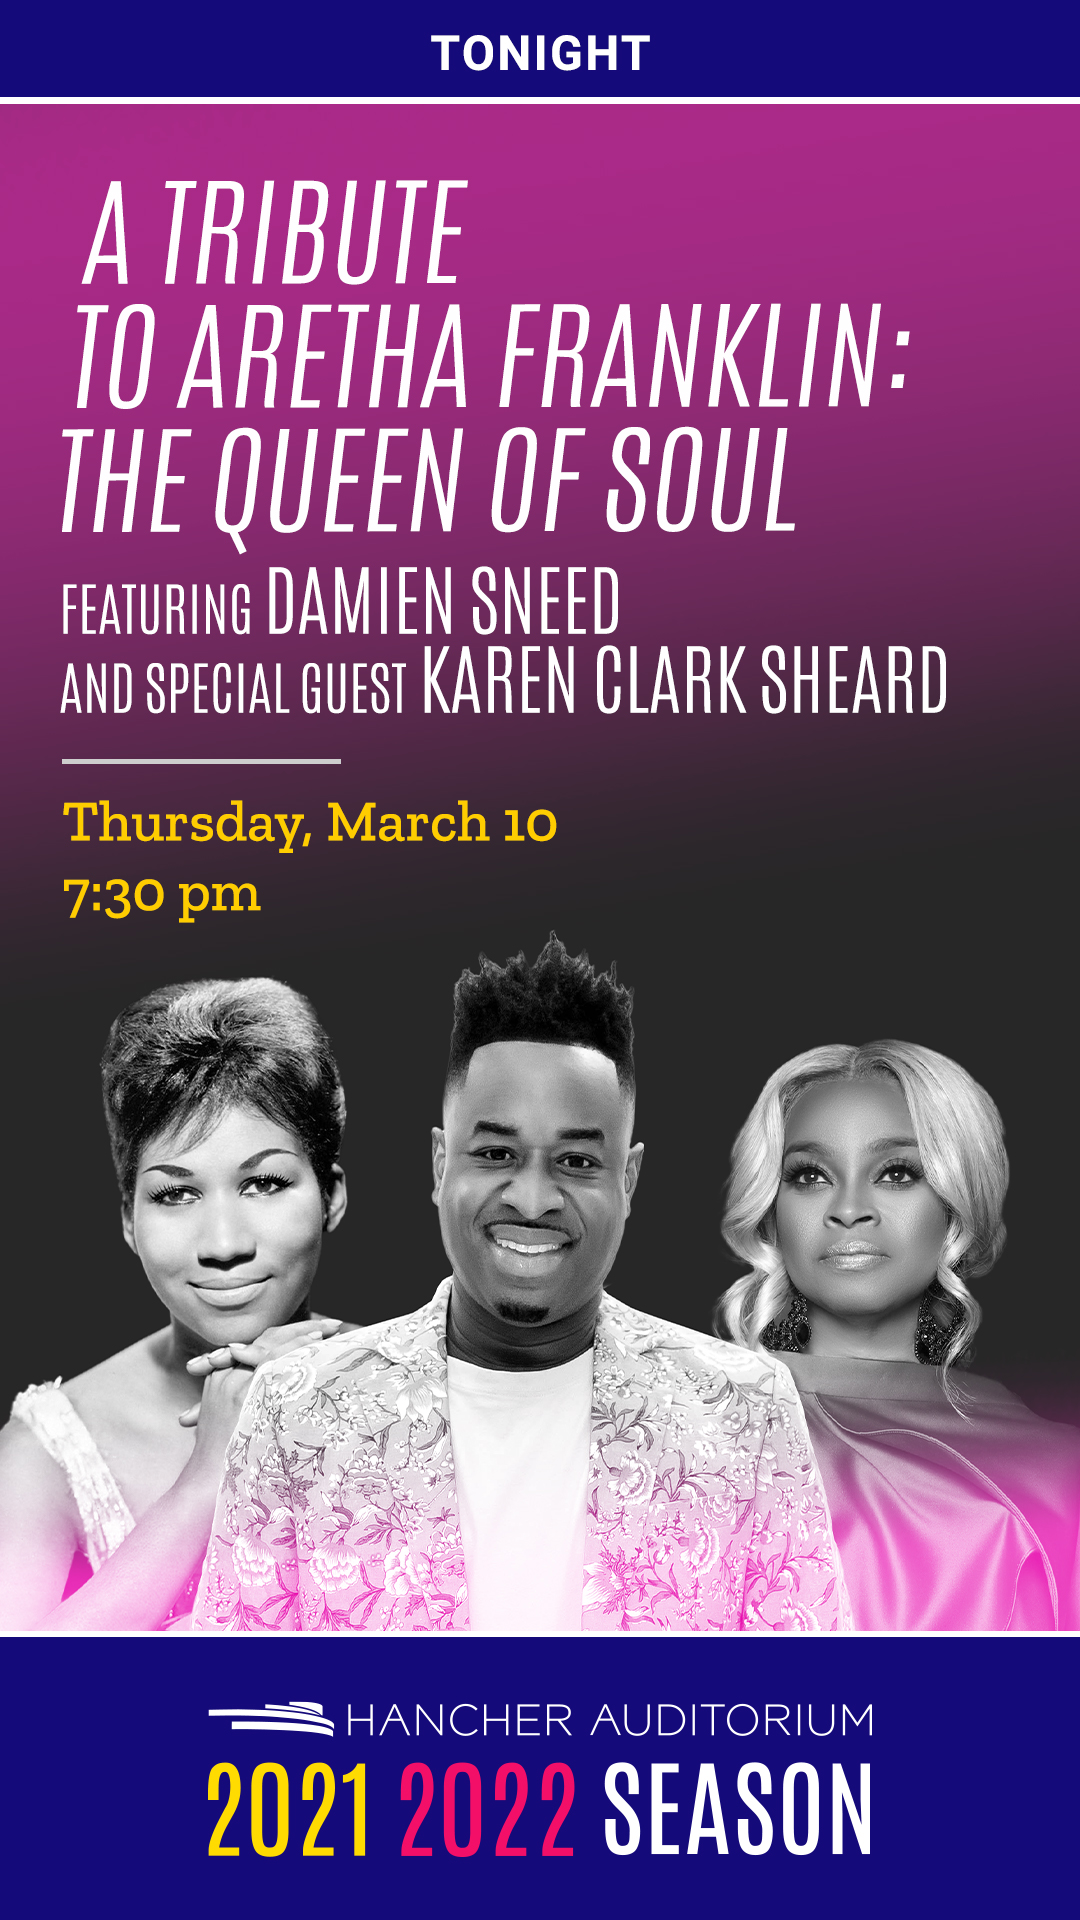 A Tribute to Aretha Franklin: The Queen of Soul, Featuring Damien Sneed - Tonight